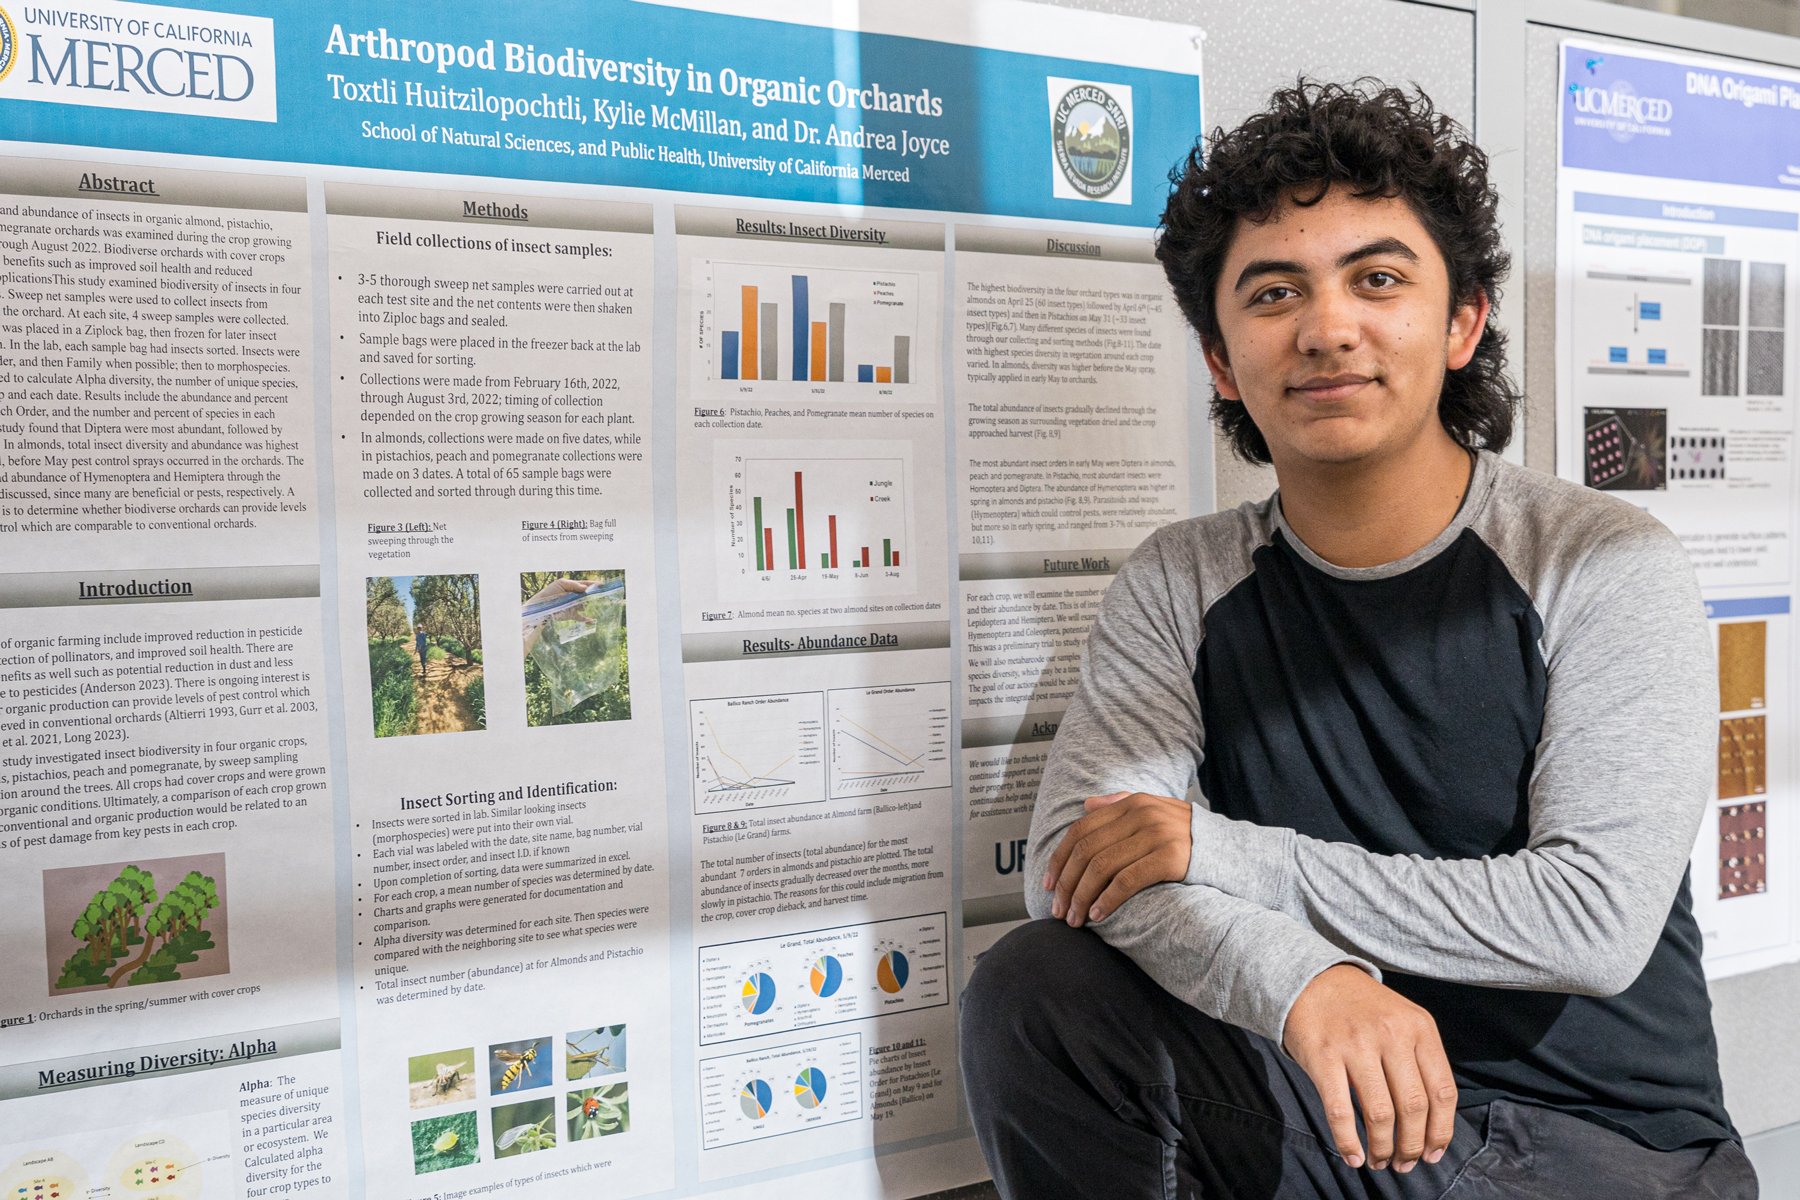 UC Merced undergraduate researcher Toxtli Huitzilopochtli with his conference poster